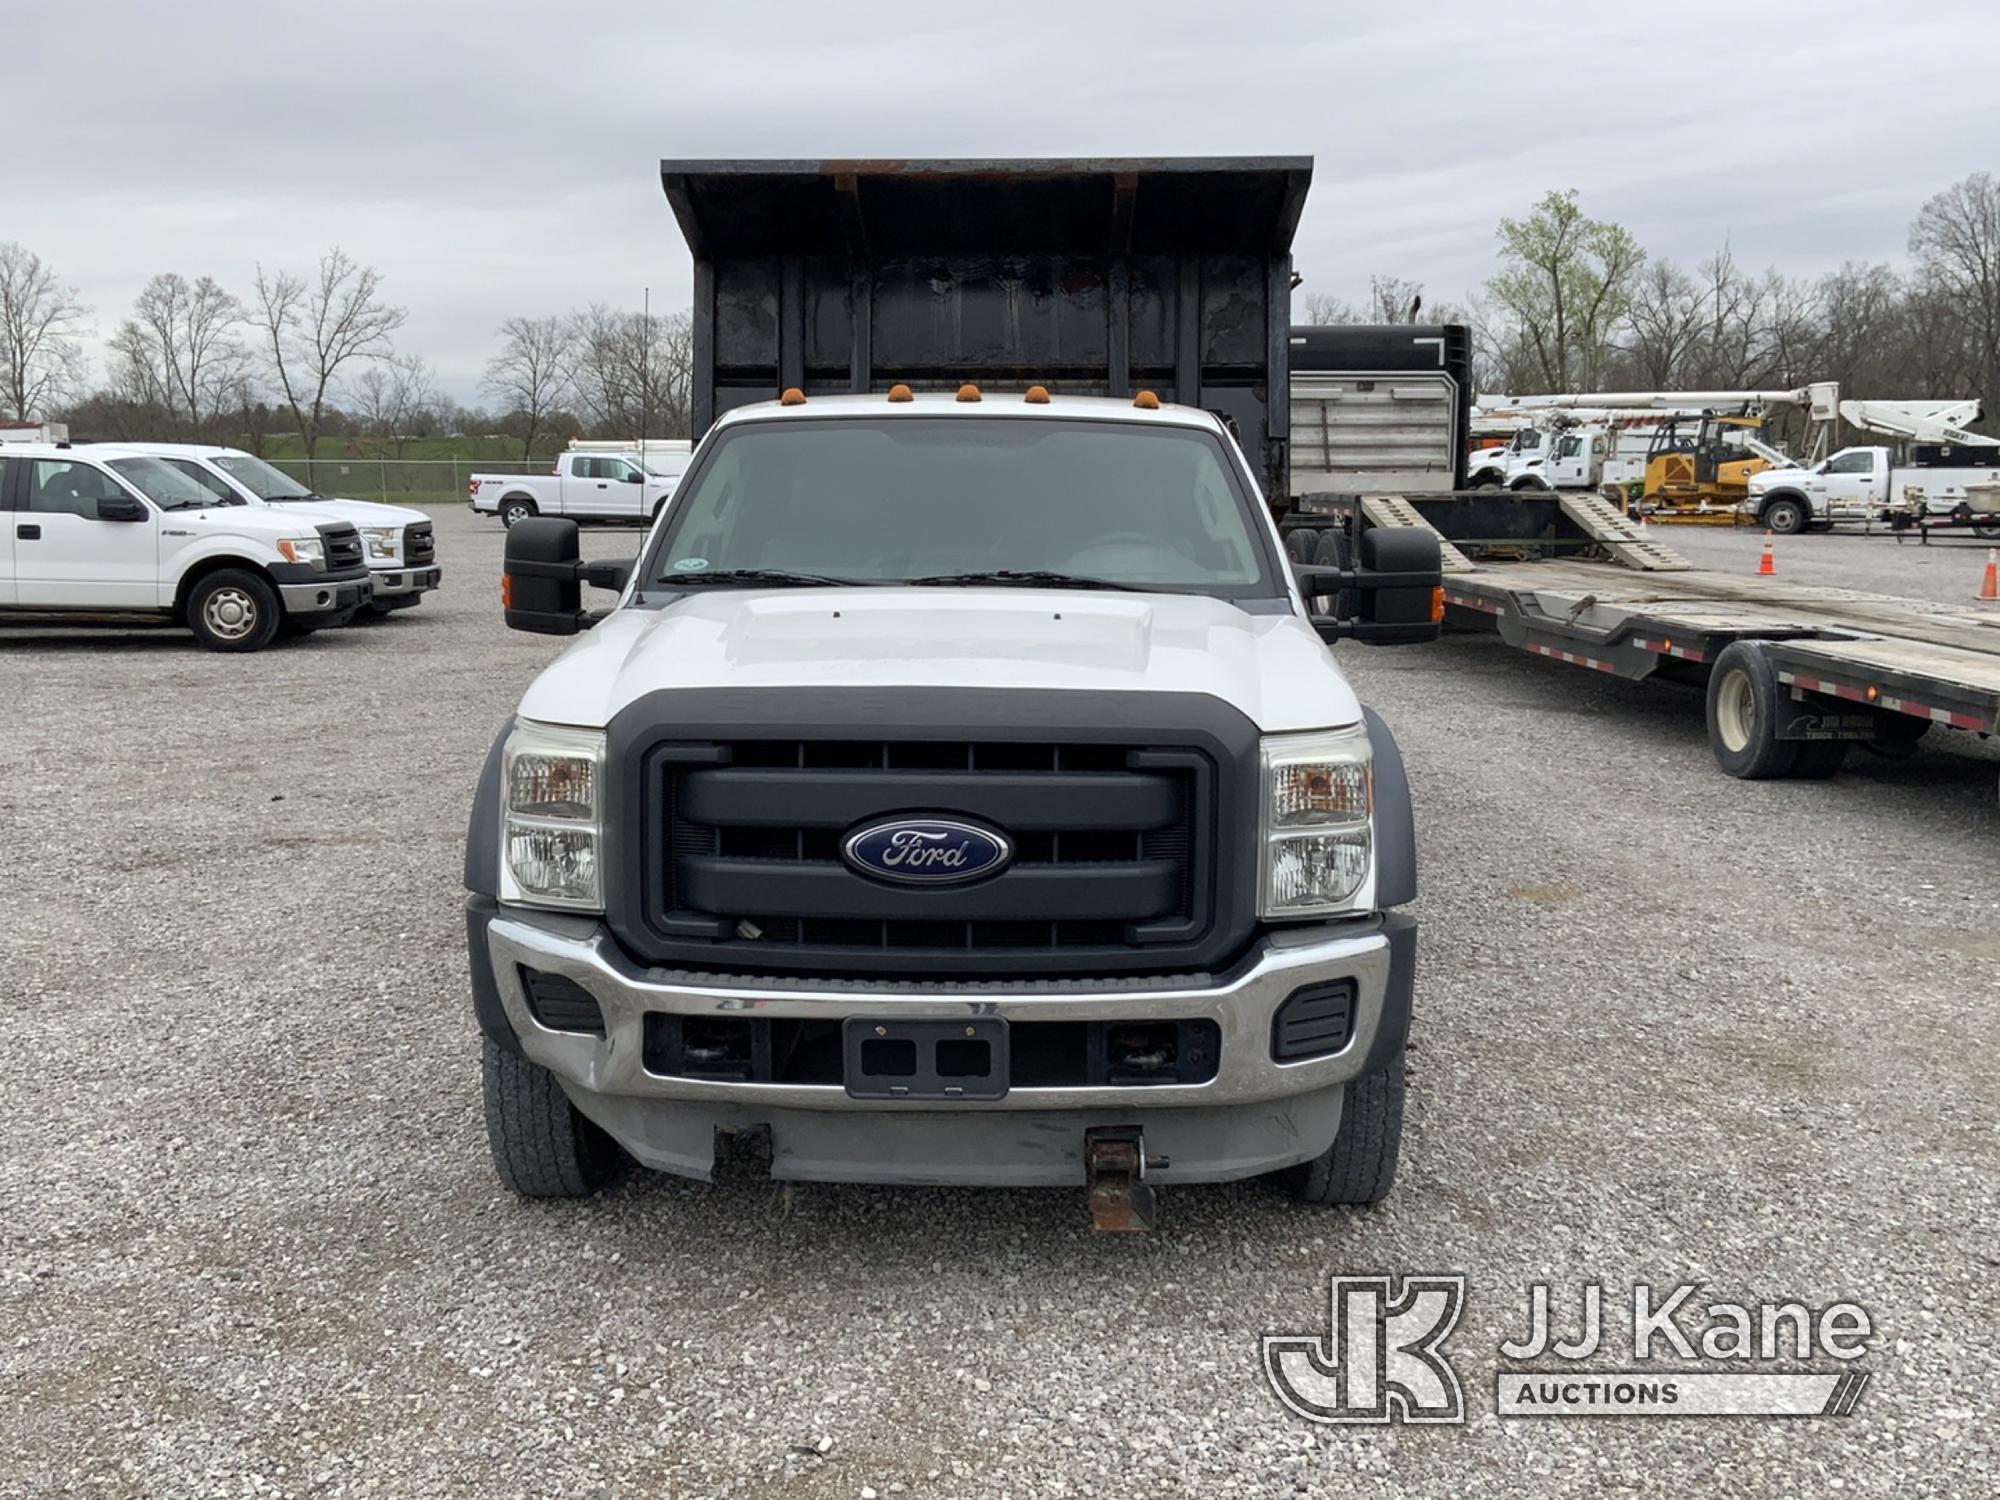 (Verona, KY) 2014 Ford F450 4x4 Extended-Cab Dump Truck Runs, Moves & Operates) (Rust Damage